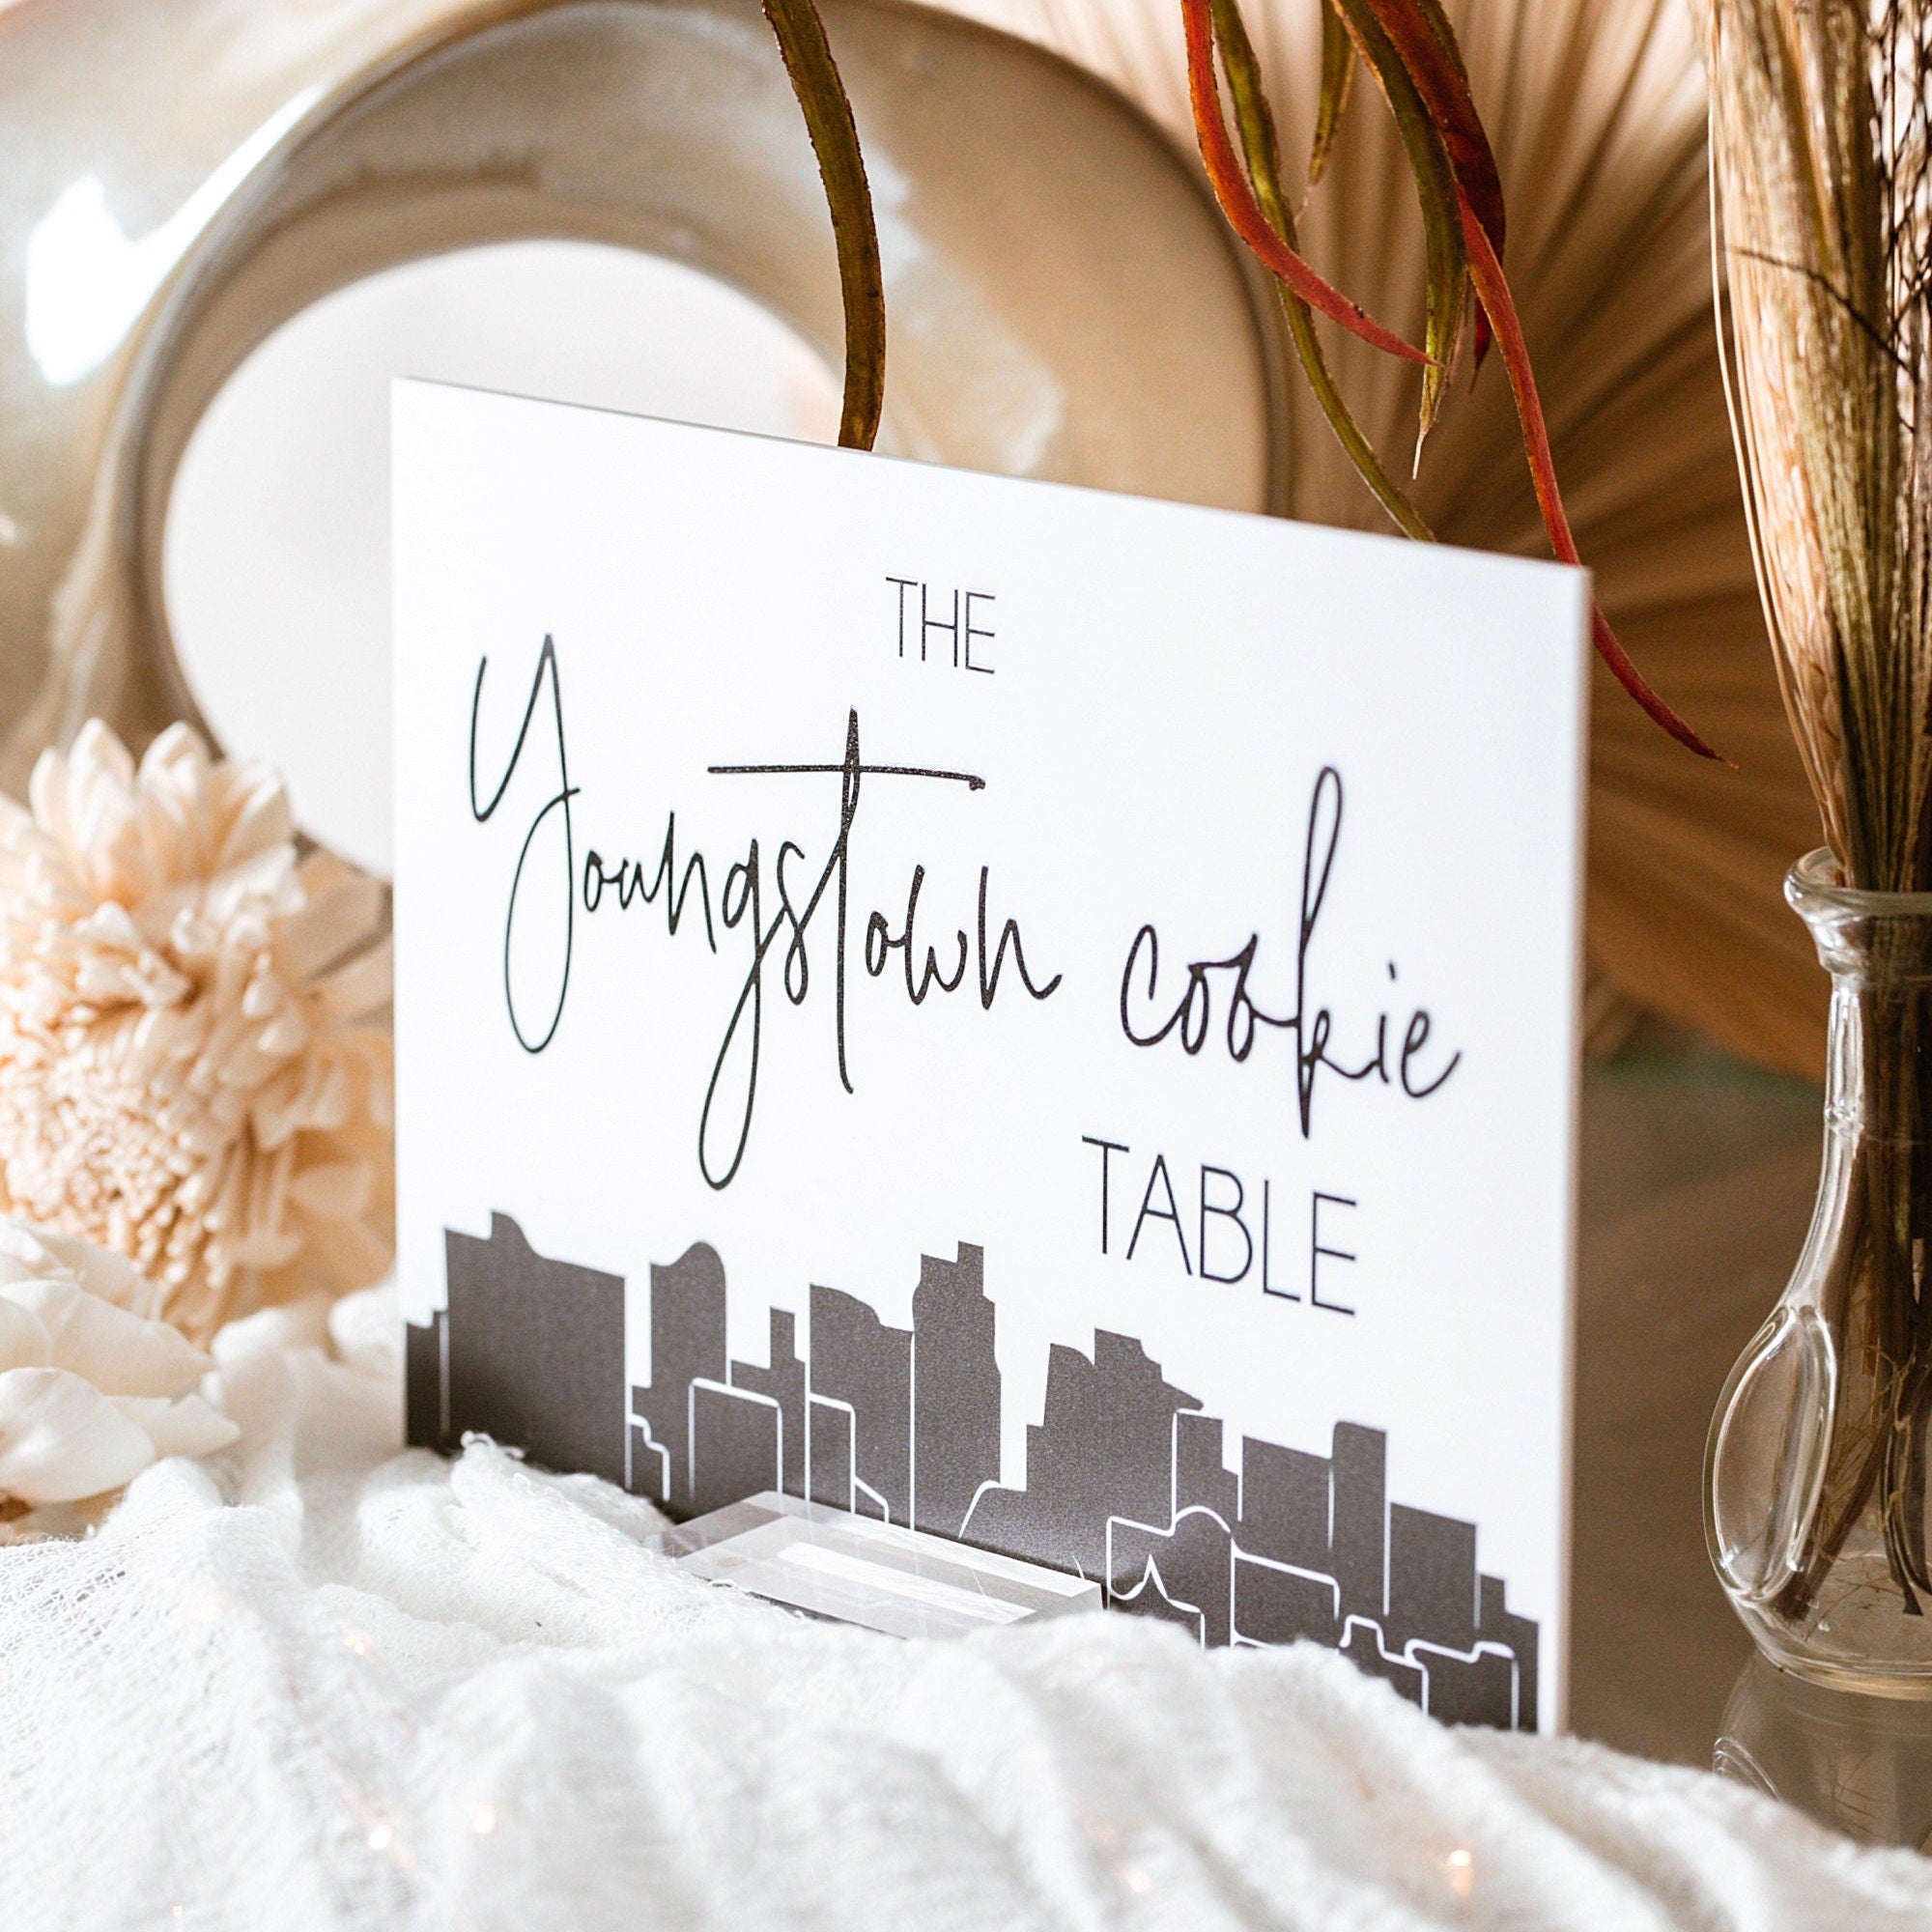 Youngstown Cookie Table Tradition Favors Clear Glass Look Acrylic Wedding Sign All of Yinz Skyline Lucite Perspex Cookies Table Sign